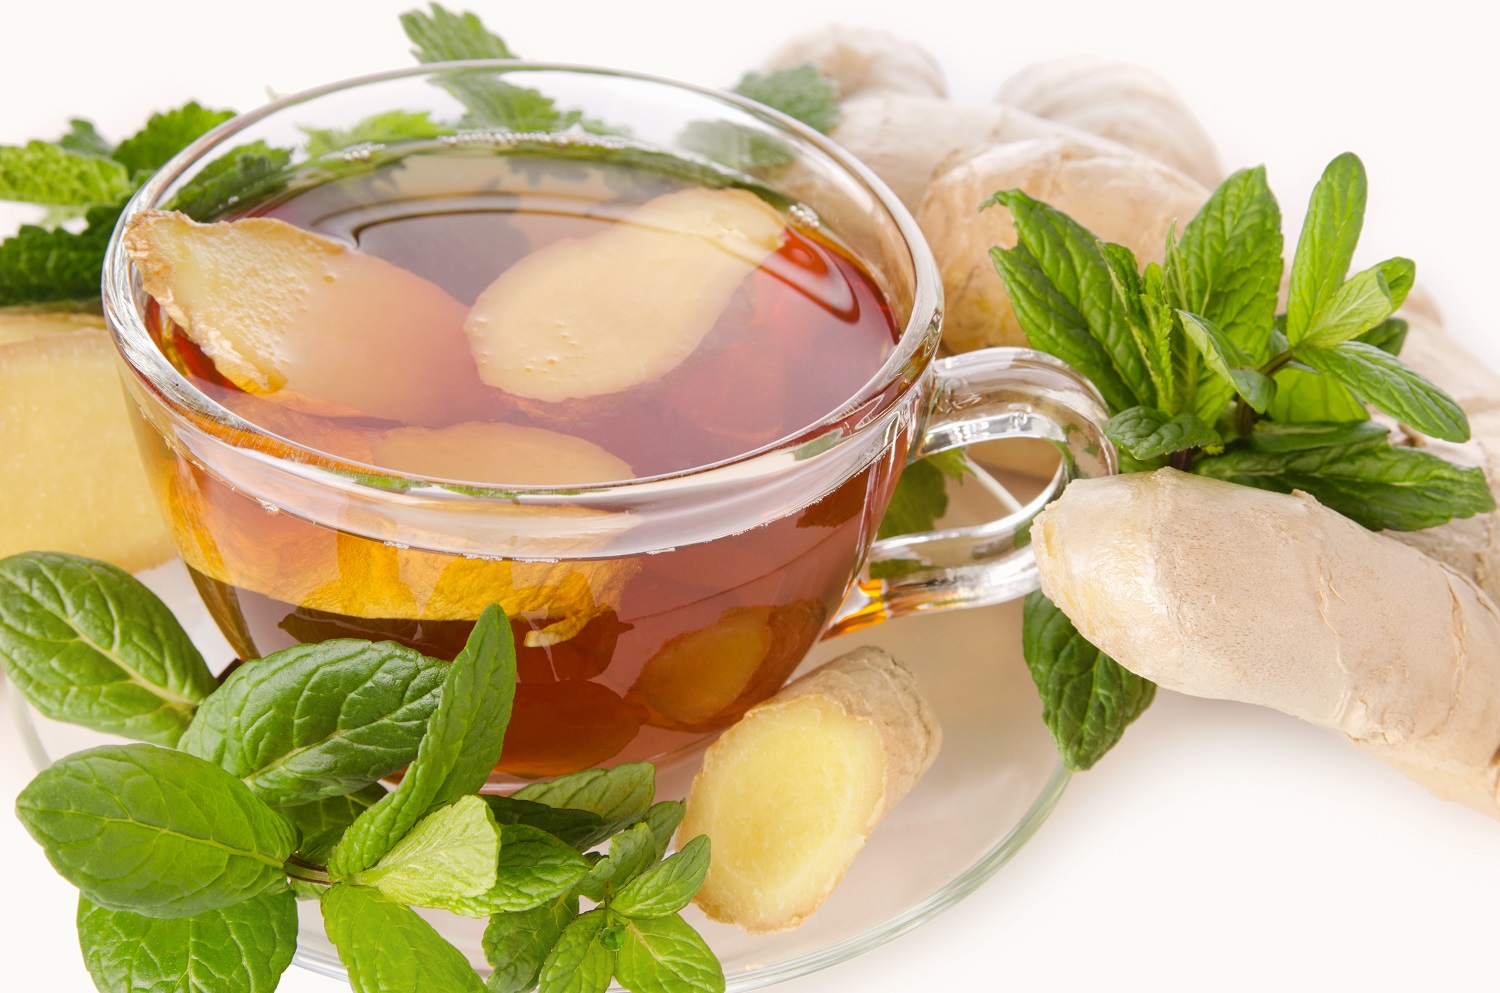 black-tea-glass-cup-with-saucer-healthy-ginger-root-mint-lemon-